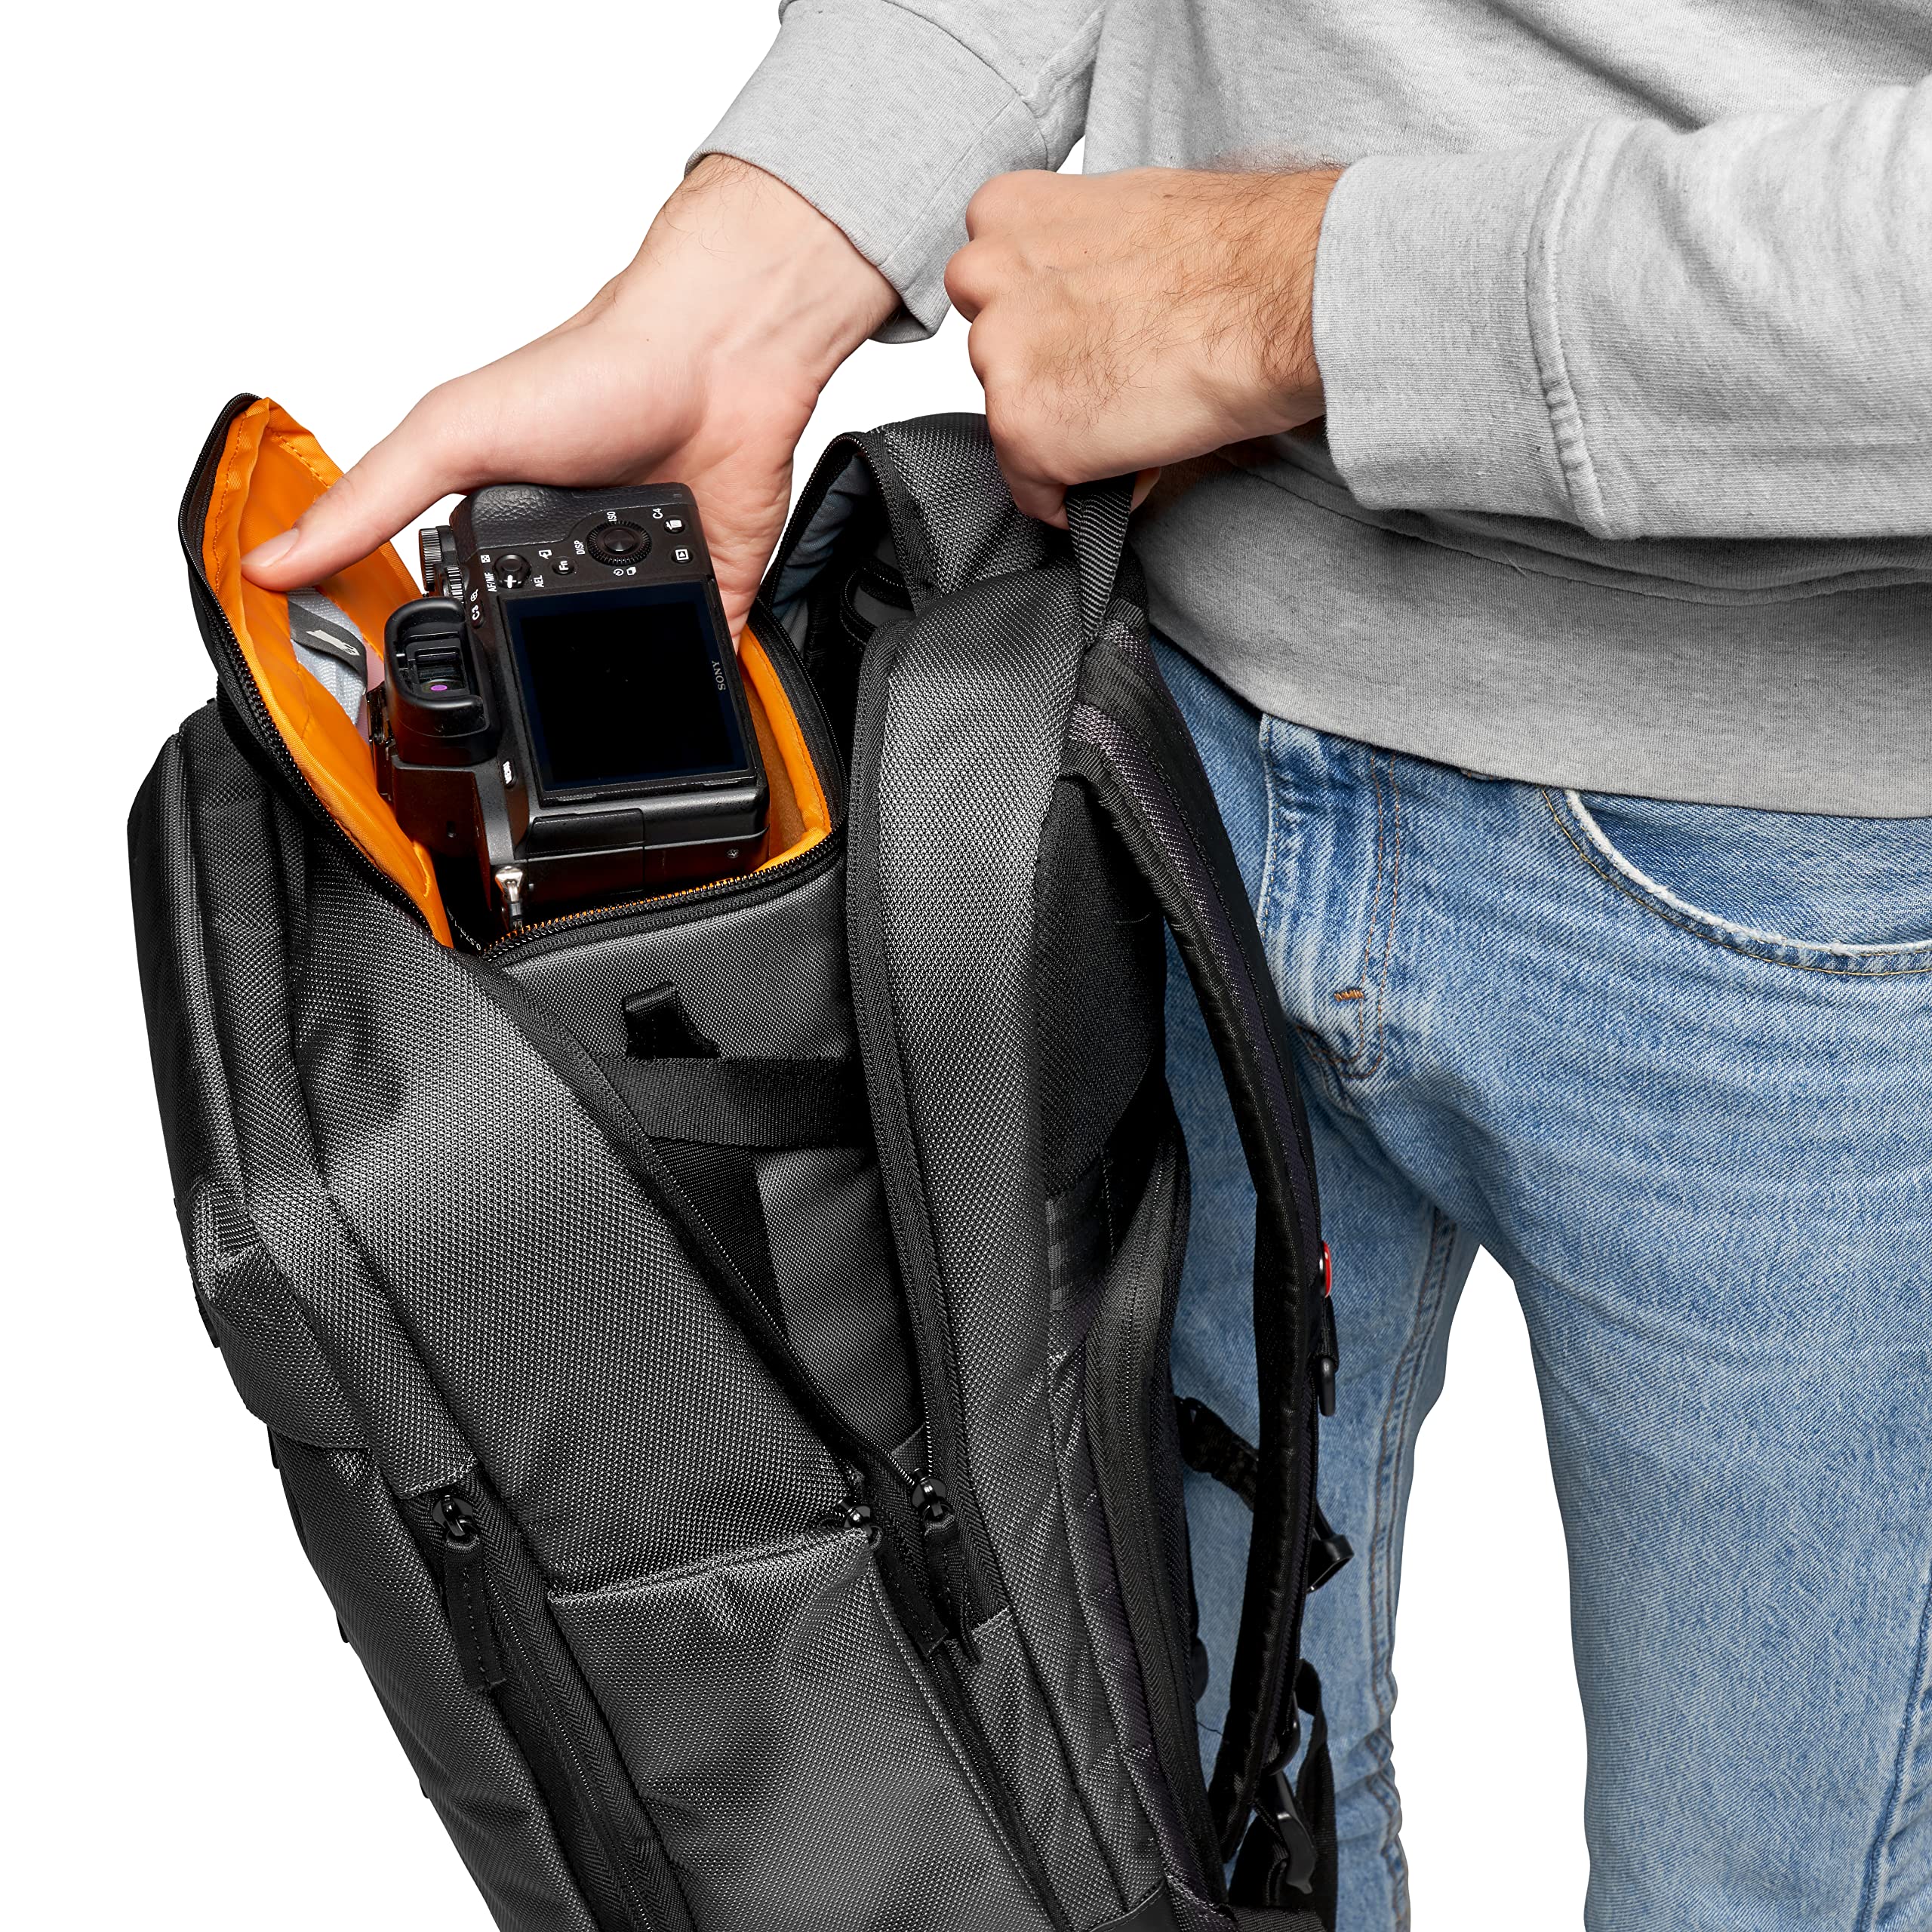 Lowepro GearUp Creator Box Medium II, Mirrorless and DSLR Camera Bag, Camera Case with QuickDoor Access, Made with Recycled Fabric, Orange Padded Interior Dividers, Grey